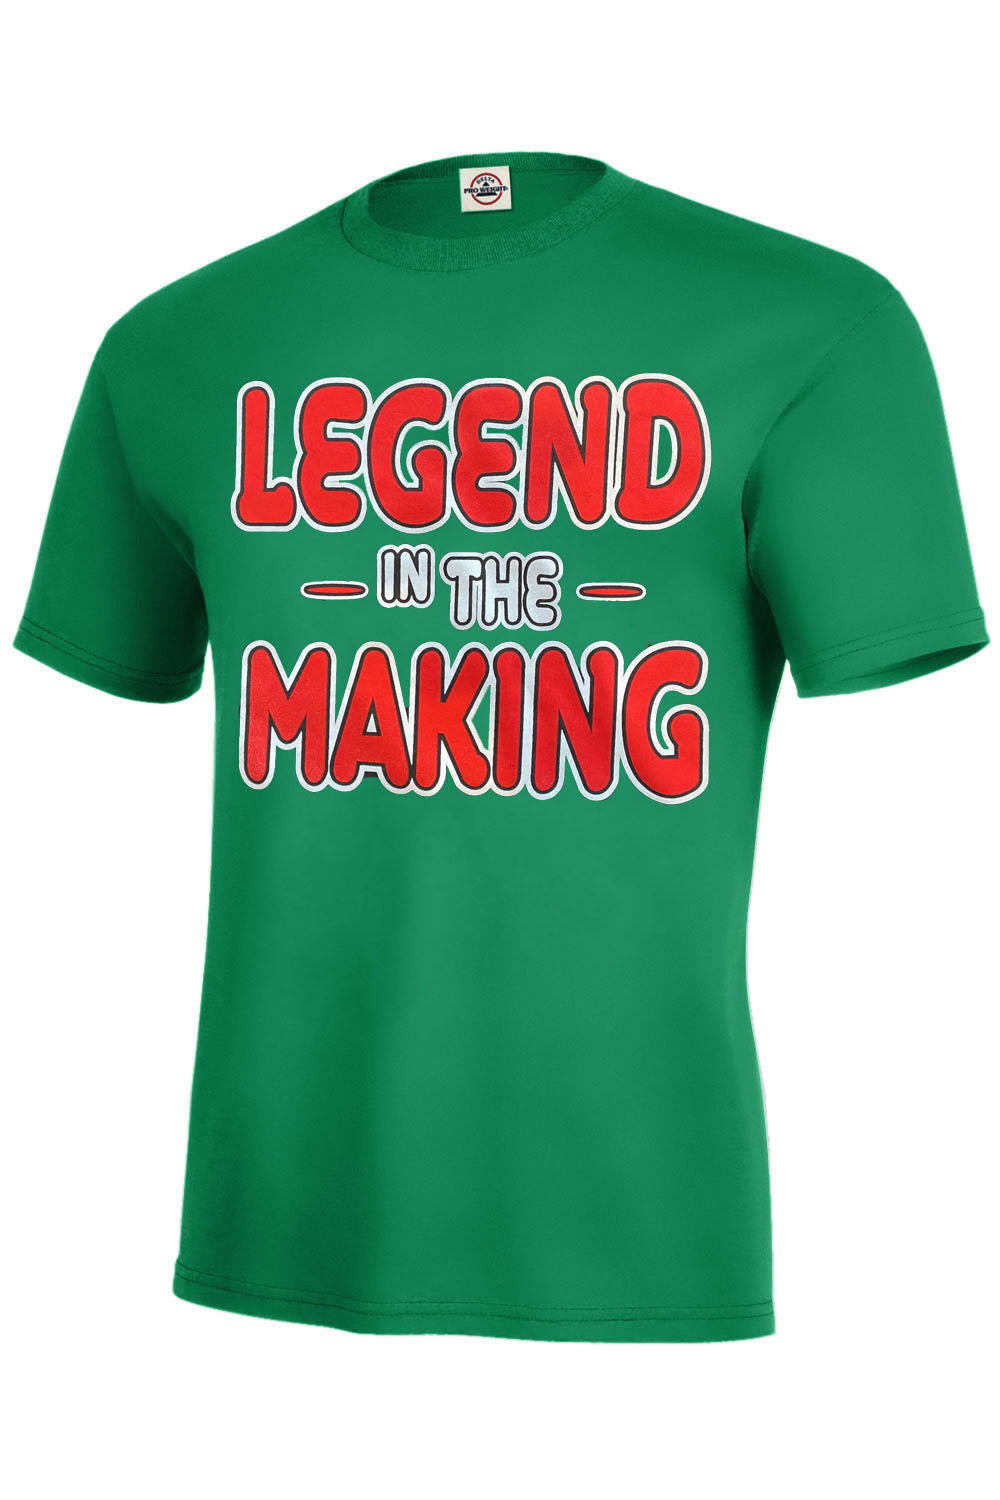 Legend In The Making Printed Men T-Shirt Assorted Colors Sizes S-3XL